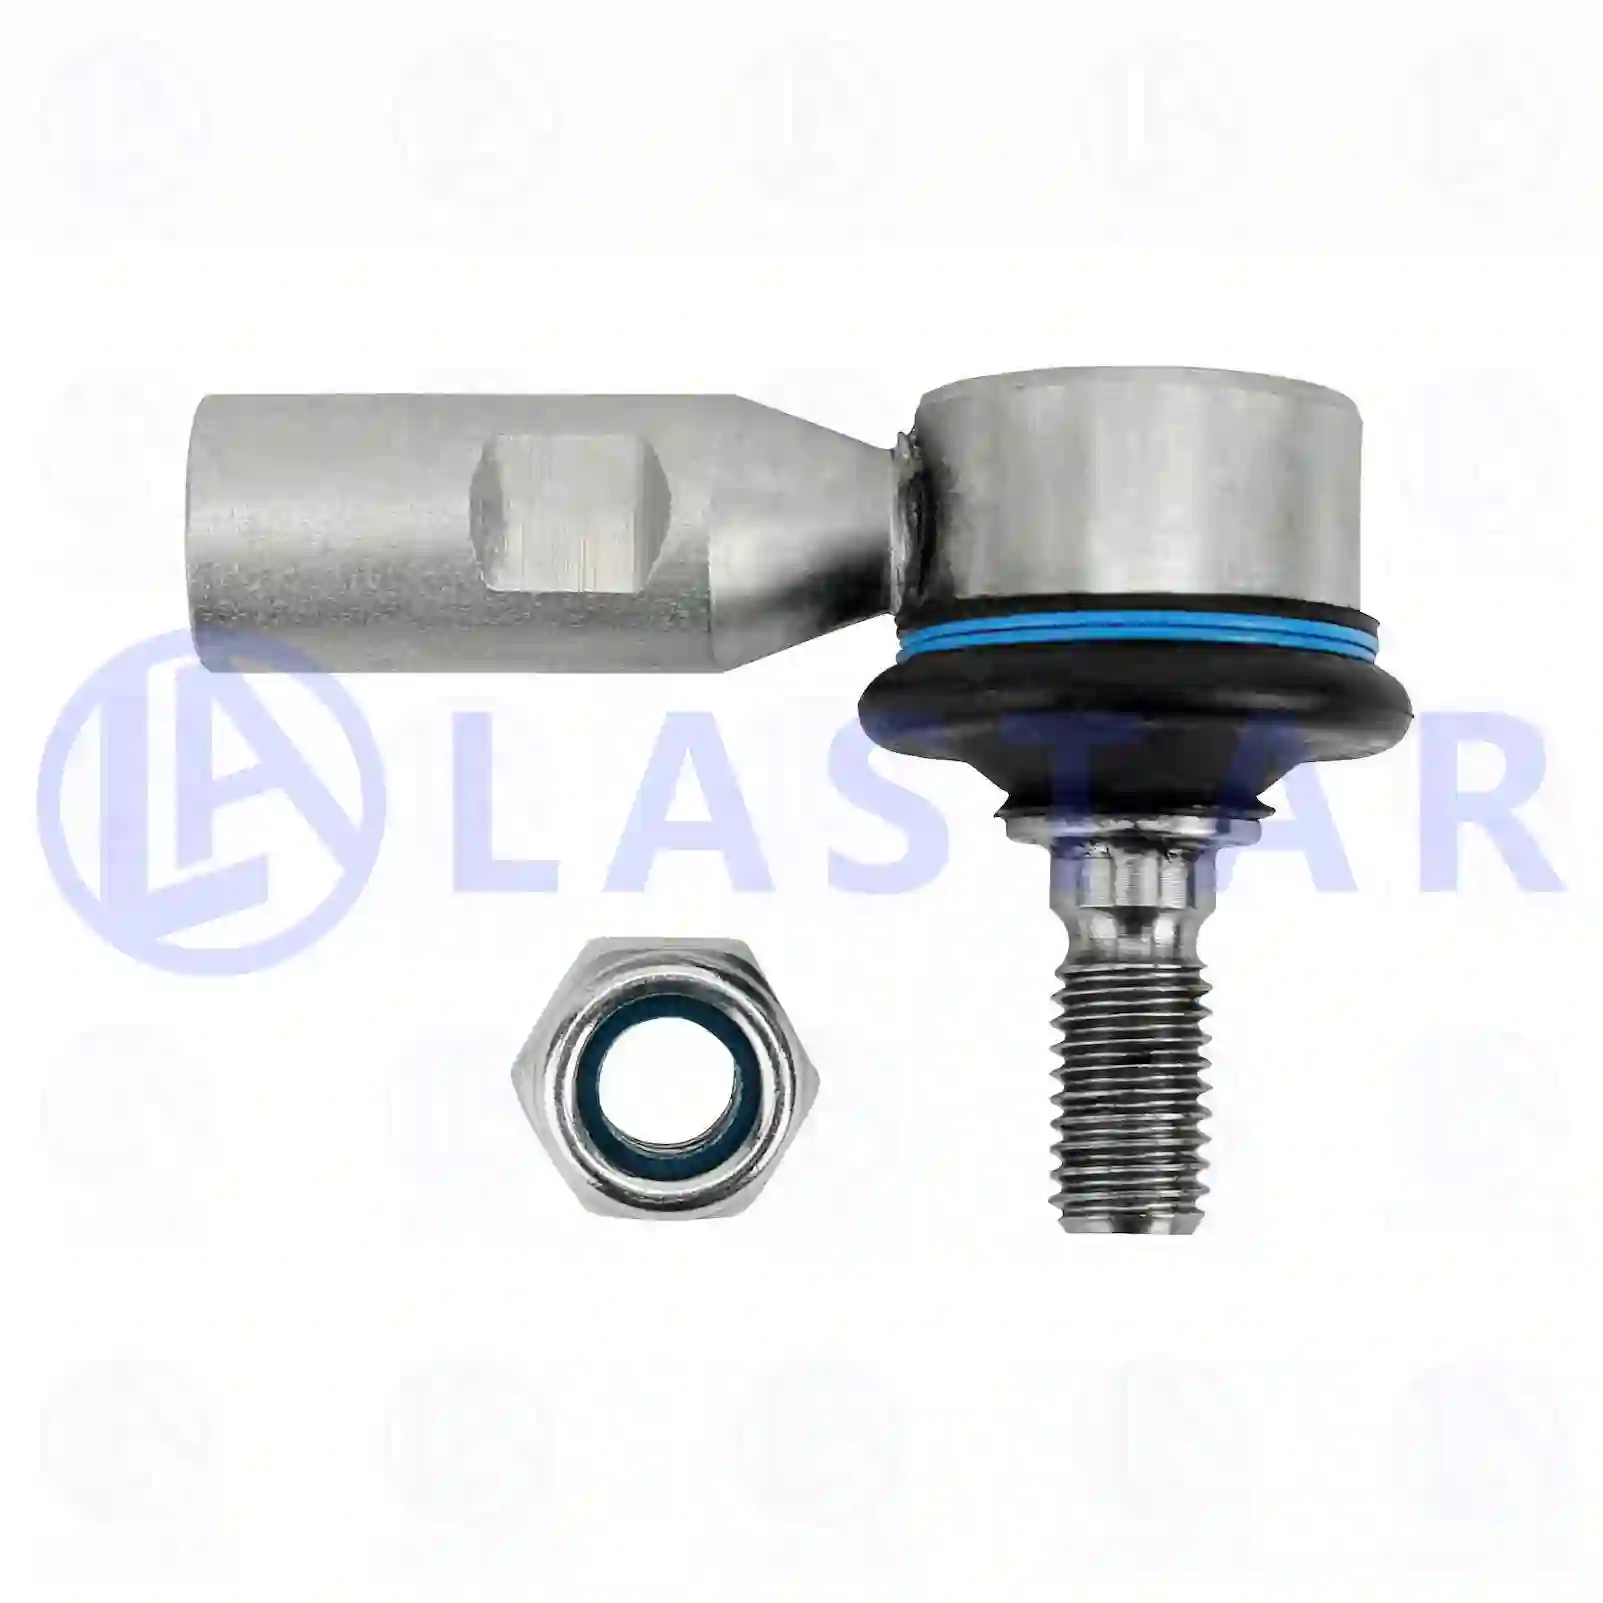 Ball joint, right hand thread, 77732036, 0009965045, 0009965545, 0009967545, 0019963045, 3849960145, 9412601489, ZG40145-0008 ||  77732036 Lastar Spare Part | Truck Spare Parts, Auotomotive Spare Parts Ball joint, right hand thread, 77732036, 0009965045, 0009965545, 0009967545, 0019963045, 3849960145, 9412601489, ZG40145-0008 ||  77732036 Lastar Spare Part | Truck Spare Parts, Auotomotive Spare Parts